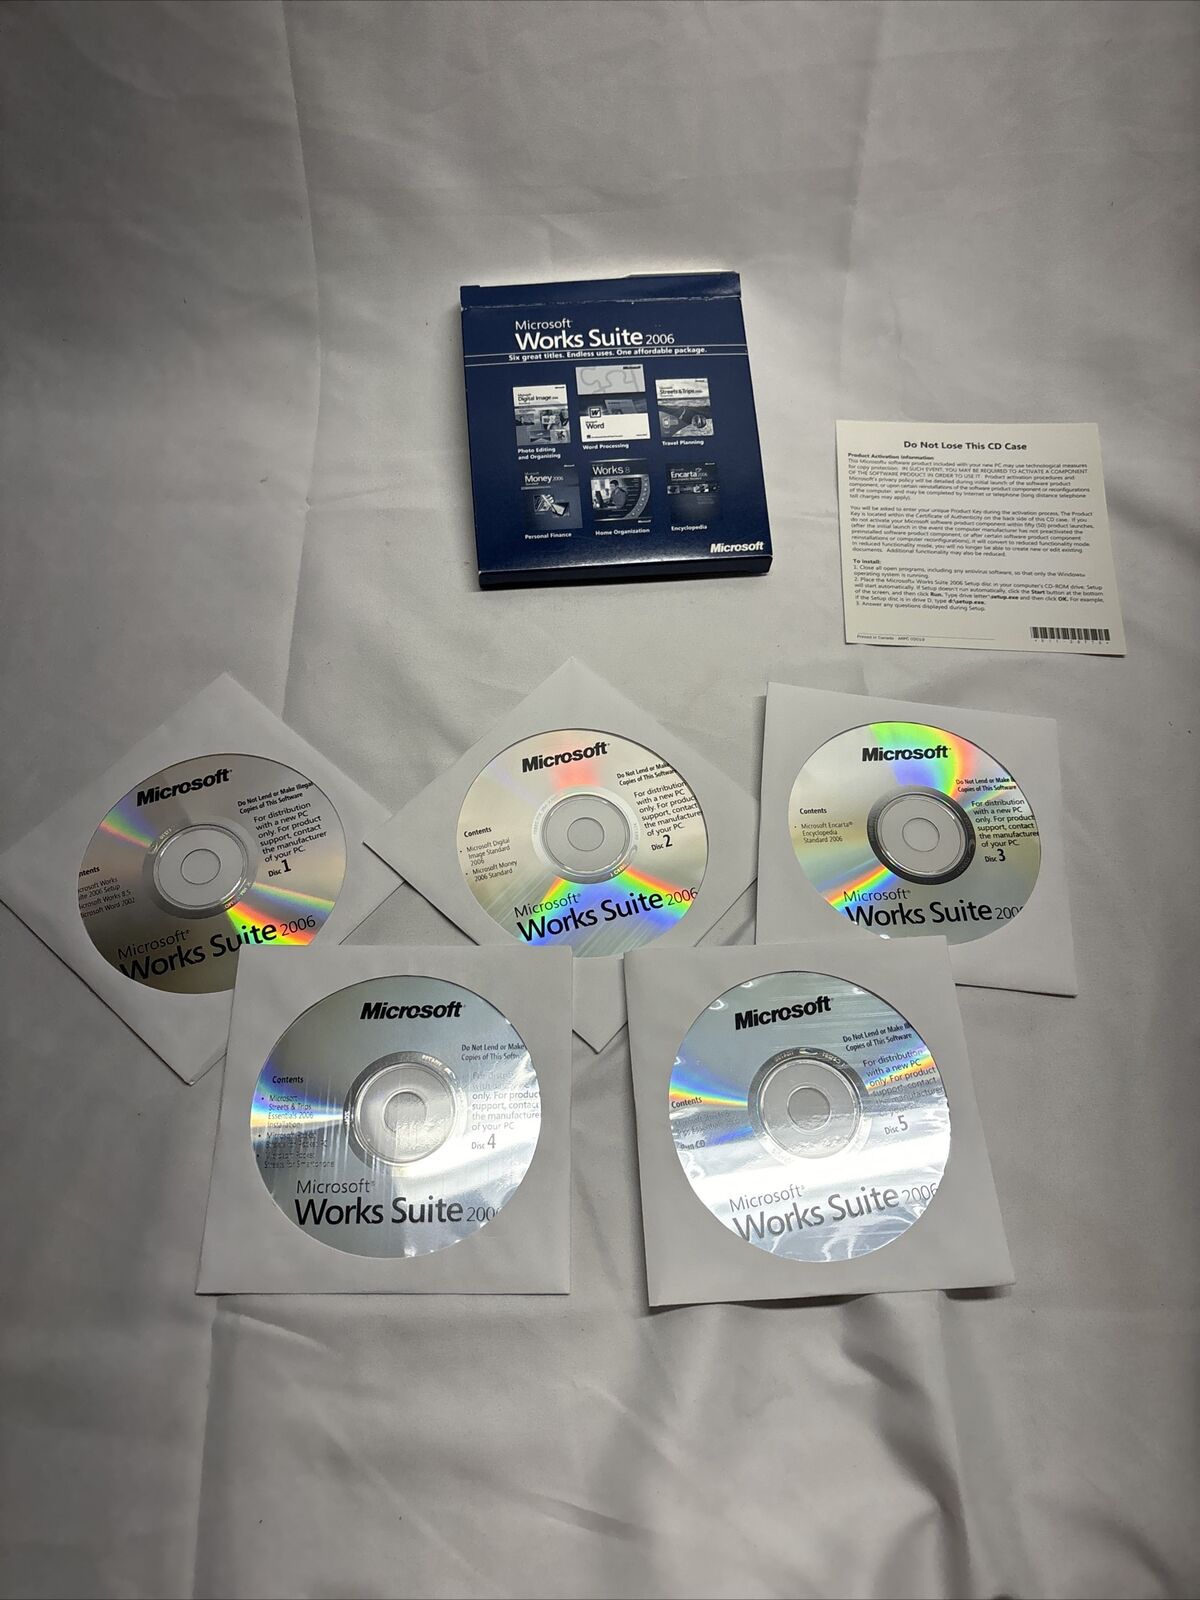 MICROSOFT WORKS SUITE 2006 - 5 CD'S - WITH PRODUCT KEY - OPENED BOX